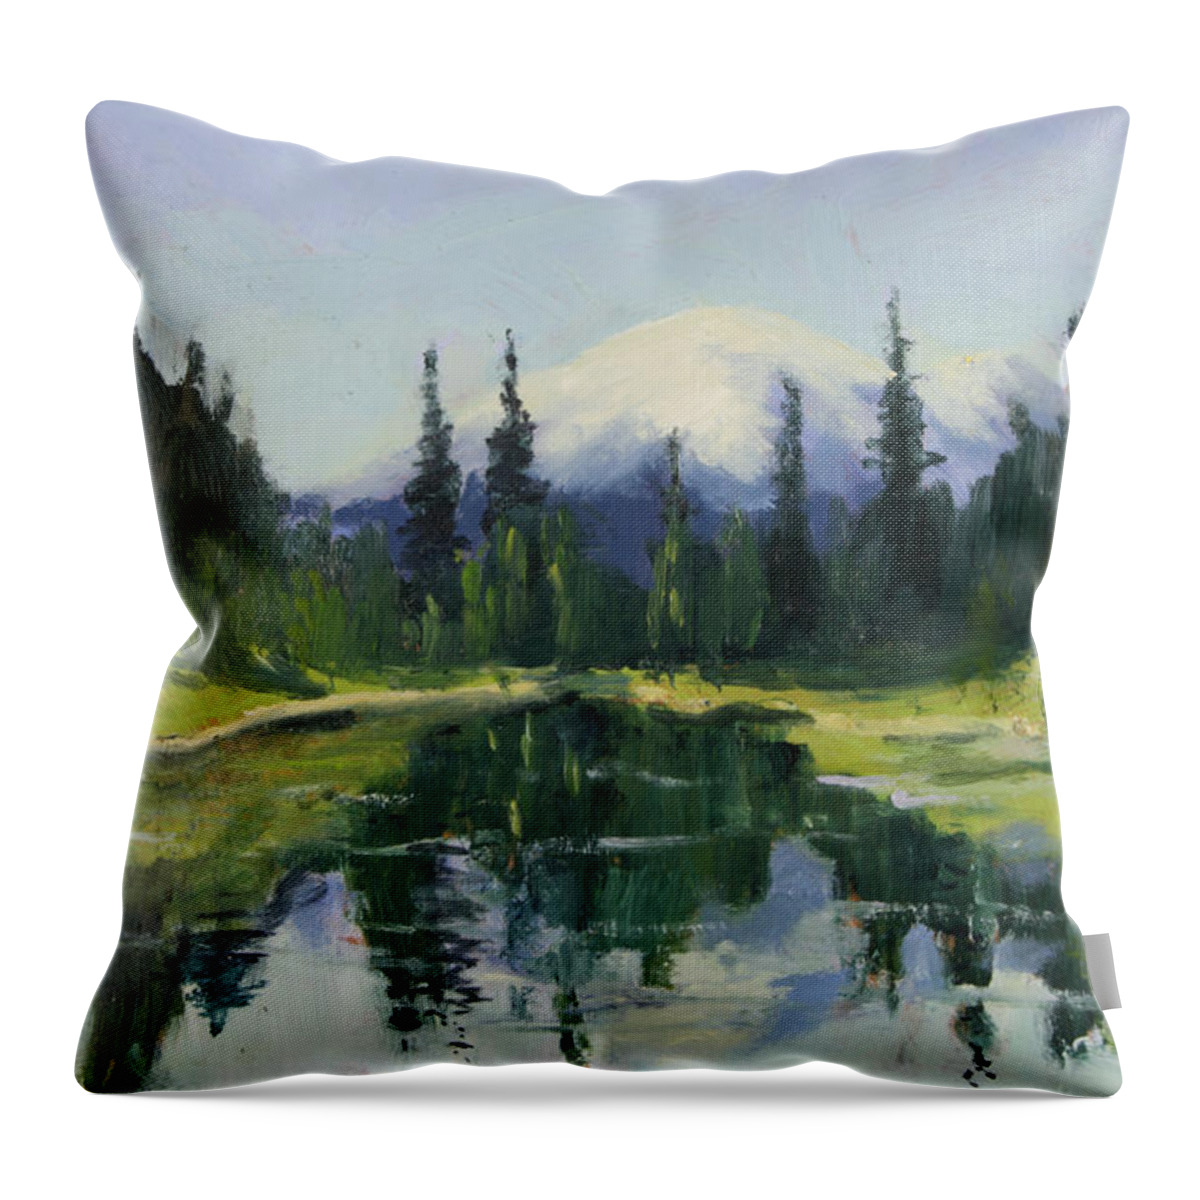 Mountain Throw Pillow featuring the painting Picnic by the Lake II by Maria Hunt